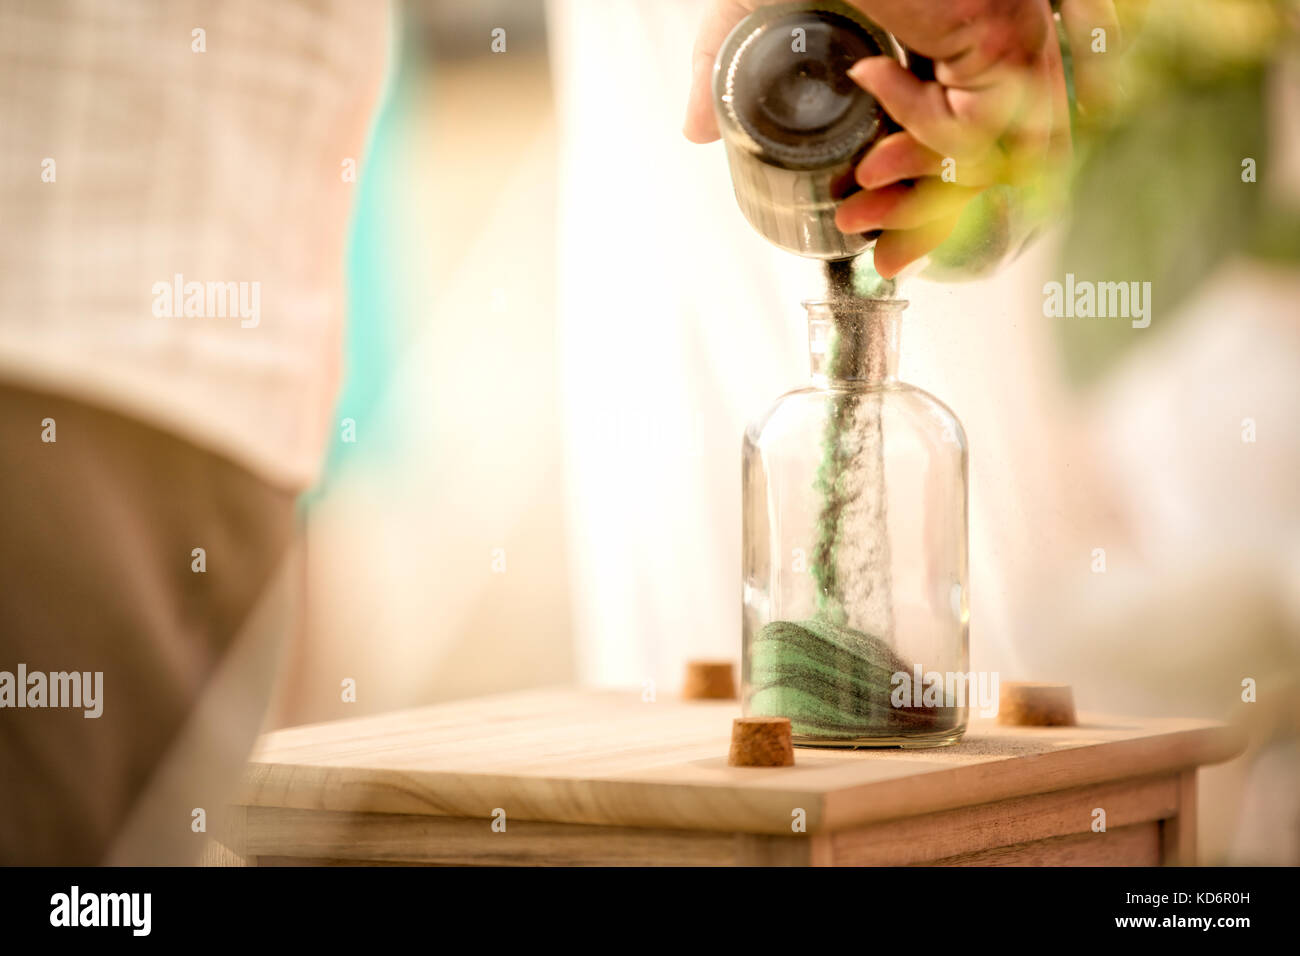 A couple pouring different colored sands into a jar, symbolizing their bond. Stock Photo